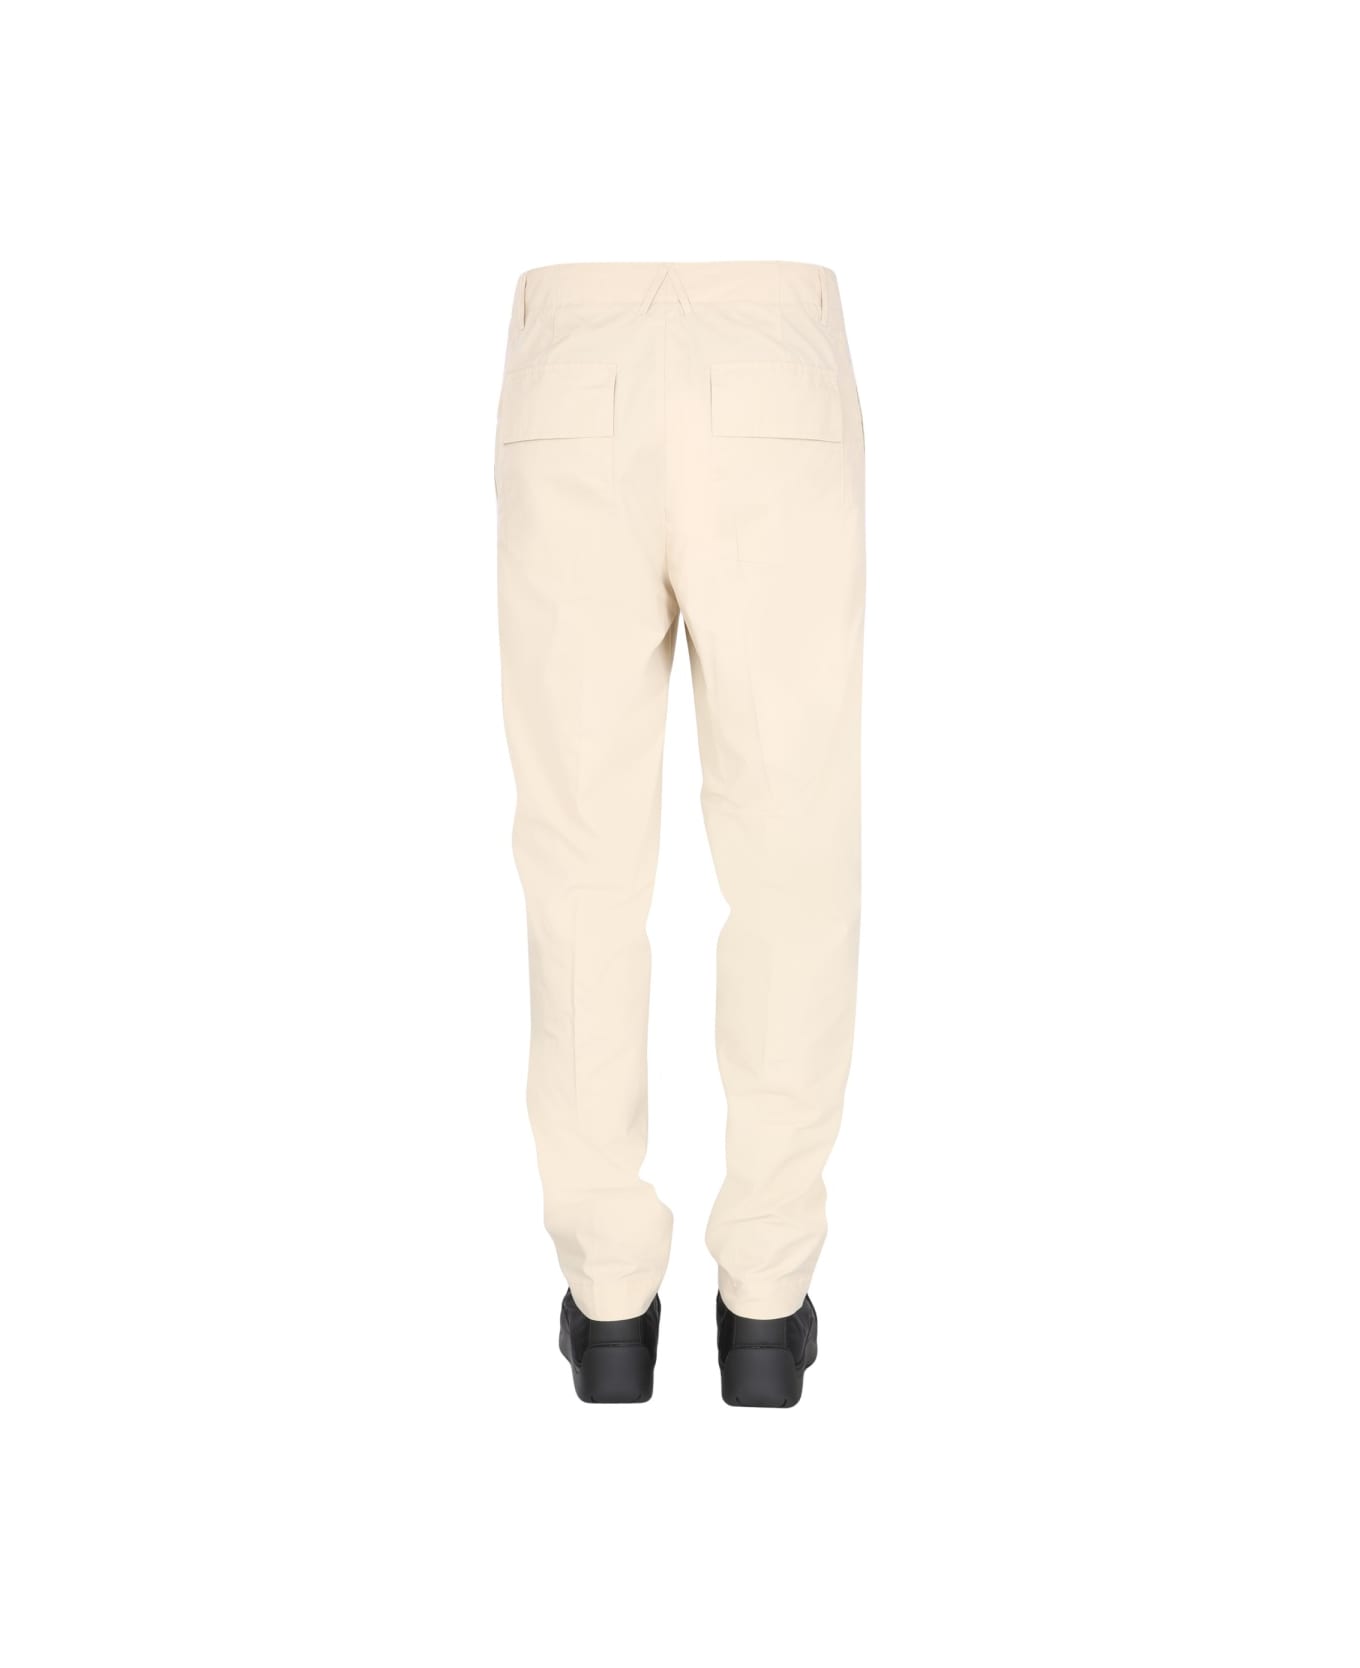 AMBUSH Relaxed Fit Trousers - BEIGE ボトムス